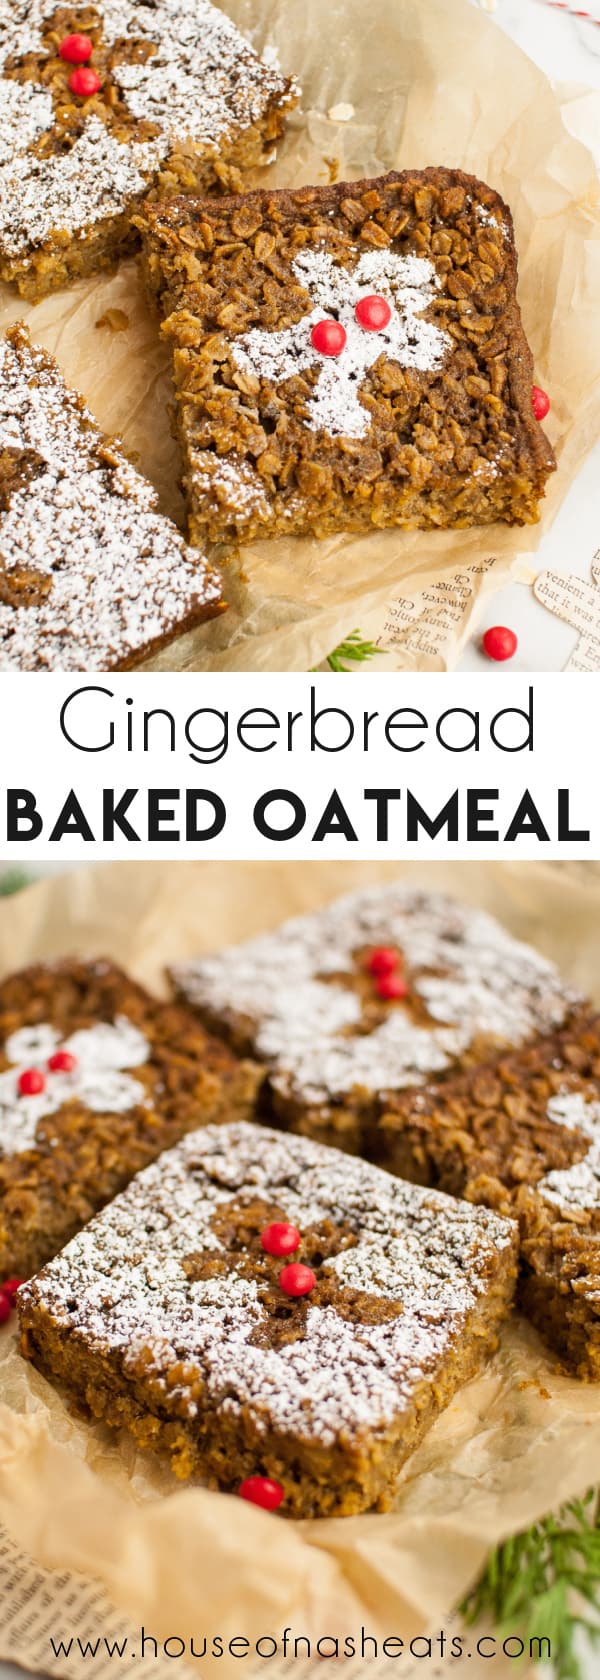 A collage of images of baked gingerbread oatmeal with powdered sugar dusted on top and text overlay.